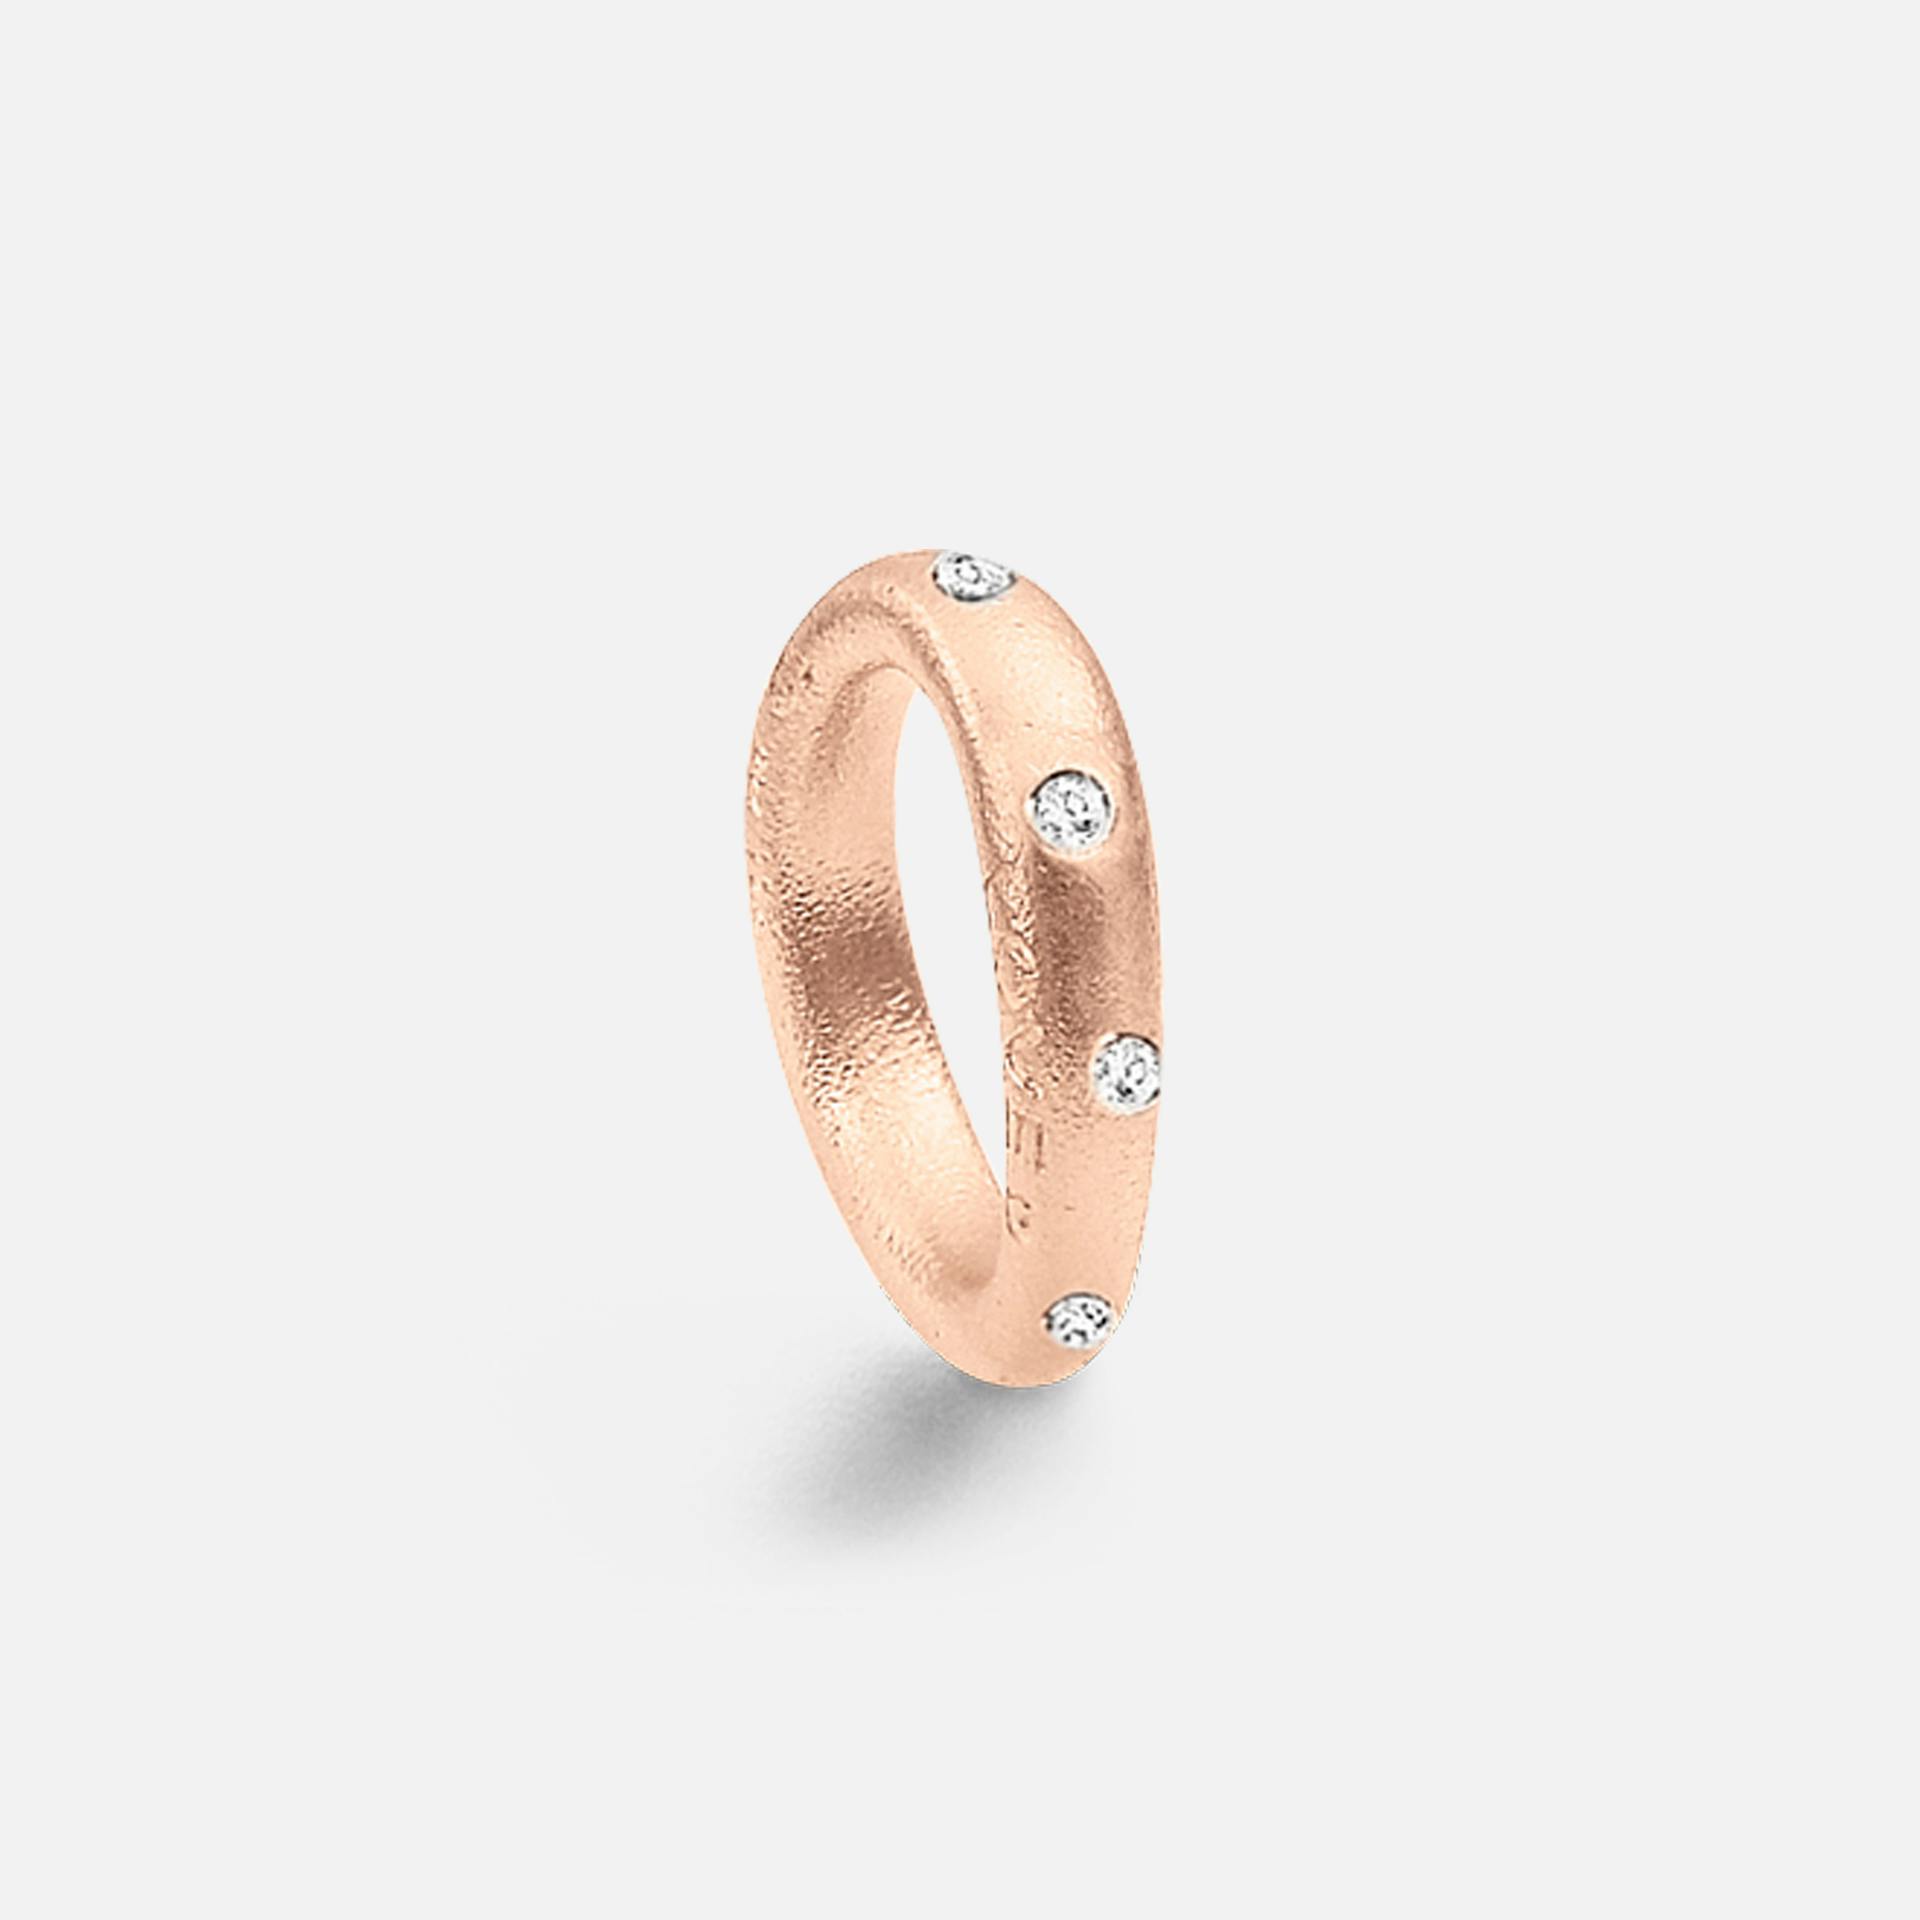 Love ring 4 18k rose gold textured and diamonds 0.18 ct. TW. VS.